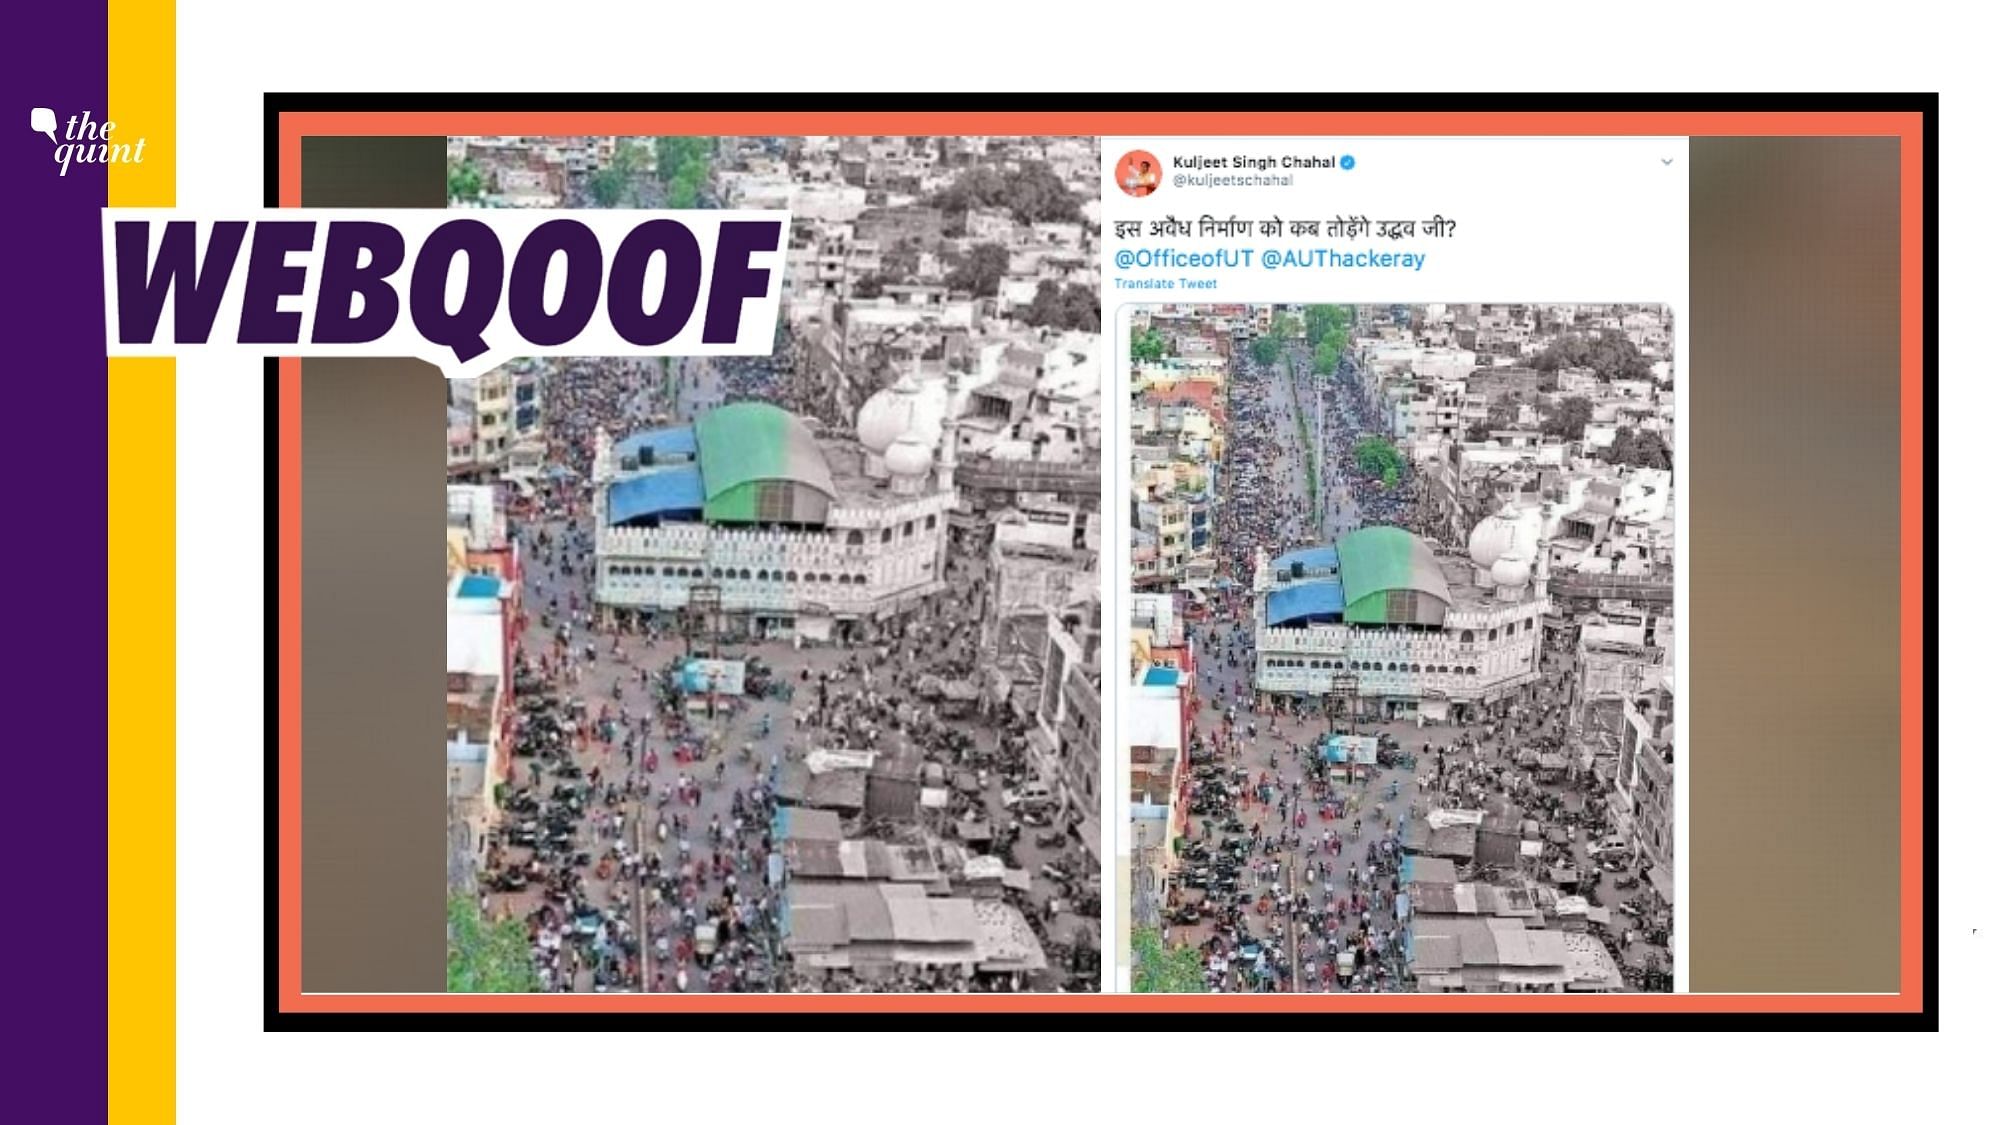 Several social media users falsely claimed that the image is from Mumbai, while in reality, it’s from Madhya Pradesh.